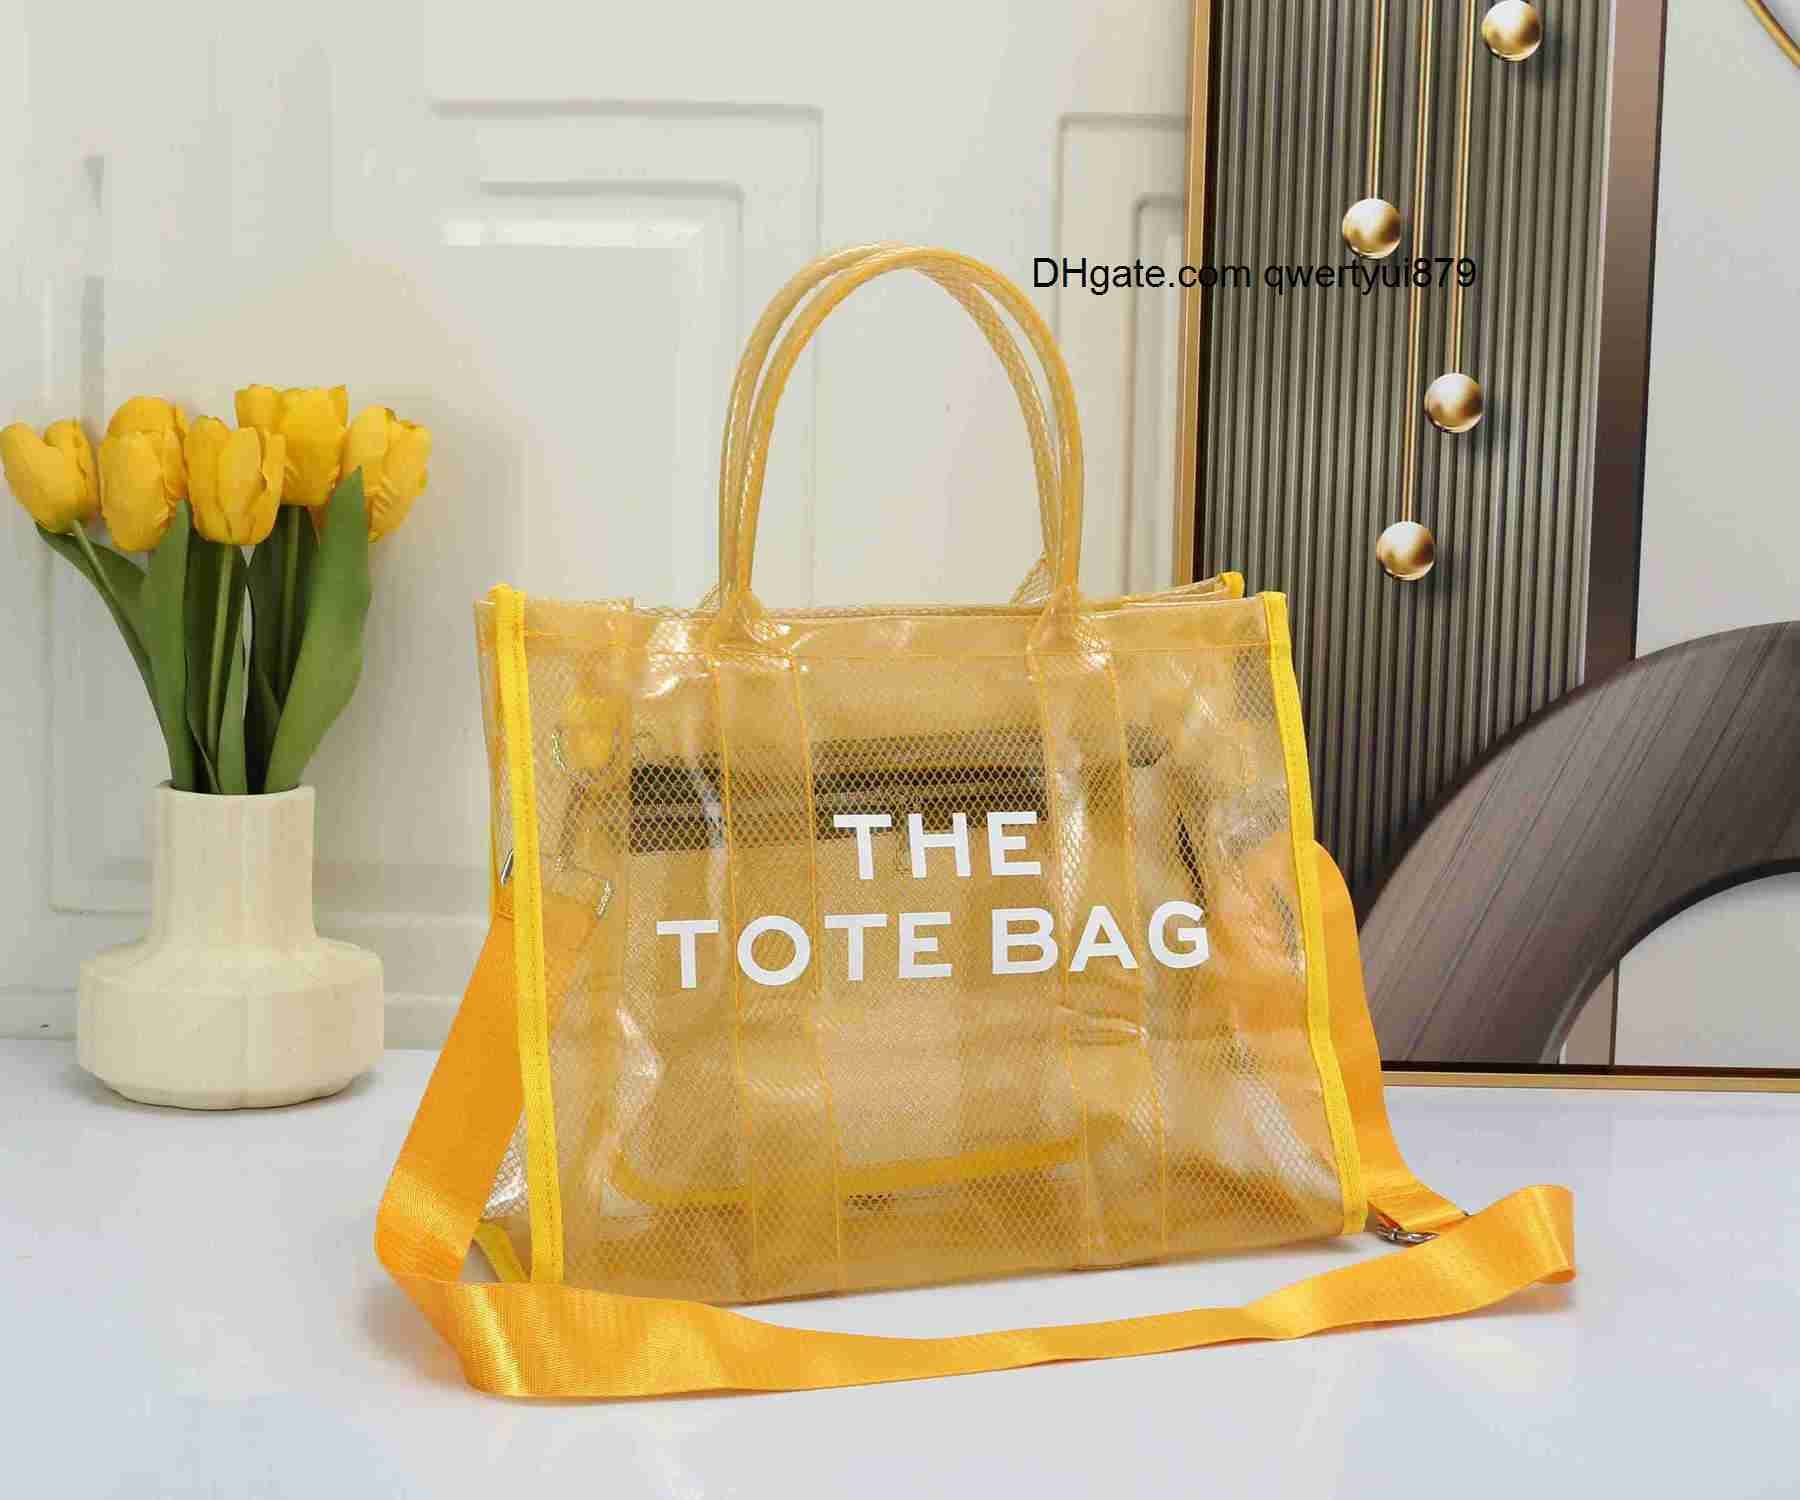 Designer Totes Clear PVC Large Branded The Tote Bag Designer Mesh Shoulder  Purses Transparent Women Jelly Hand Bag Casual Beach Shopping Tote From  Qwertyui879, $23.87